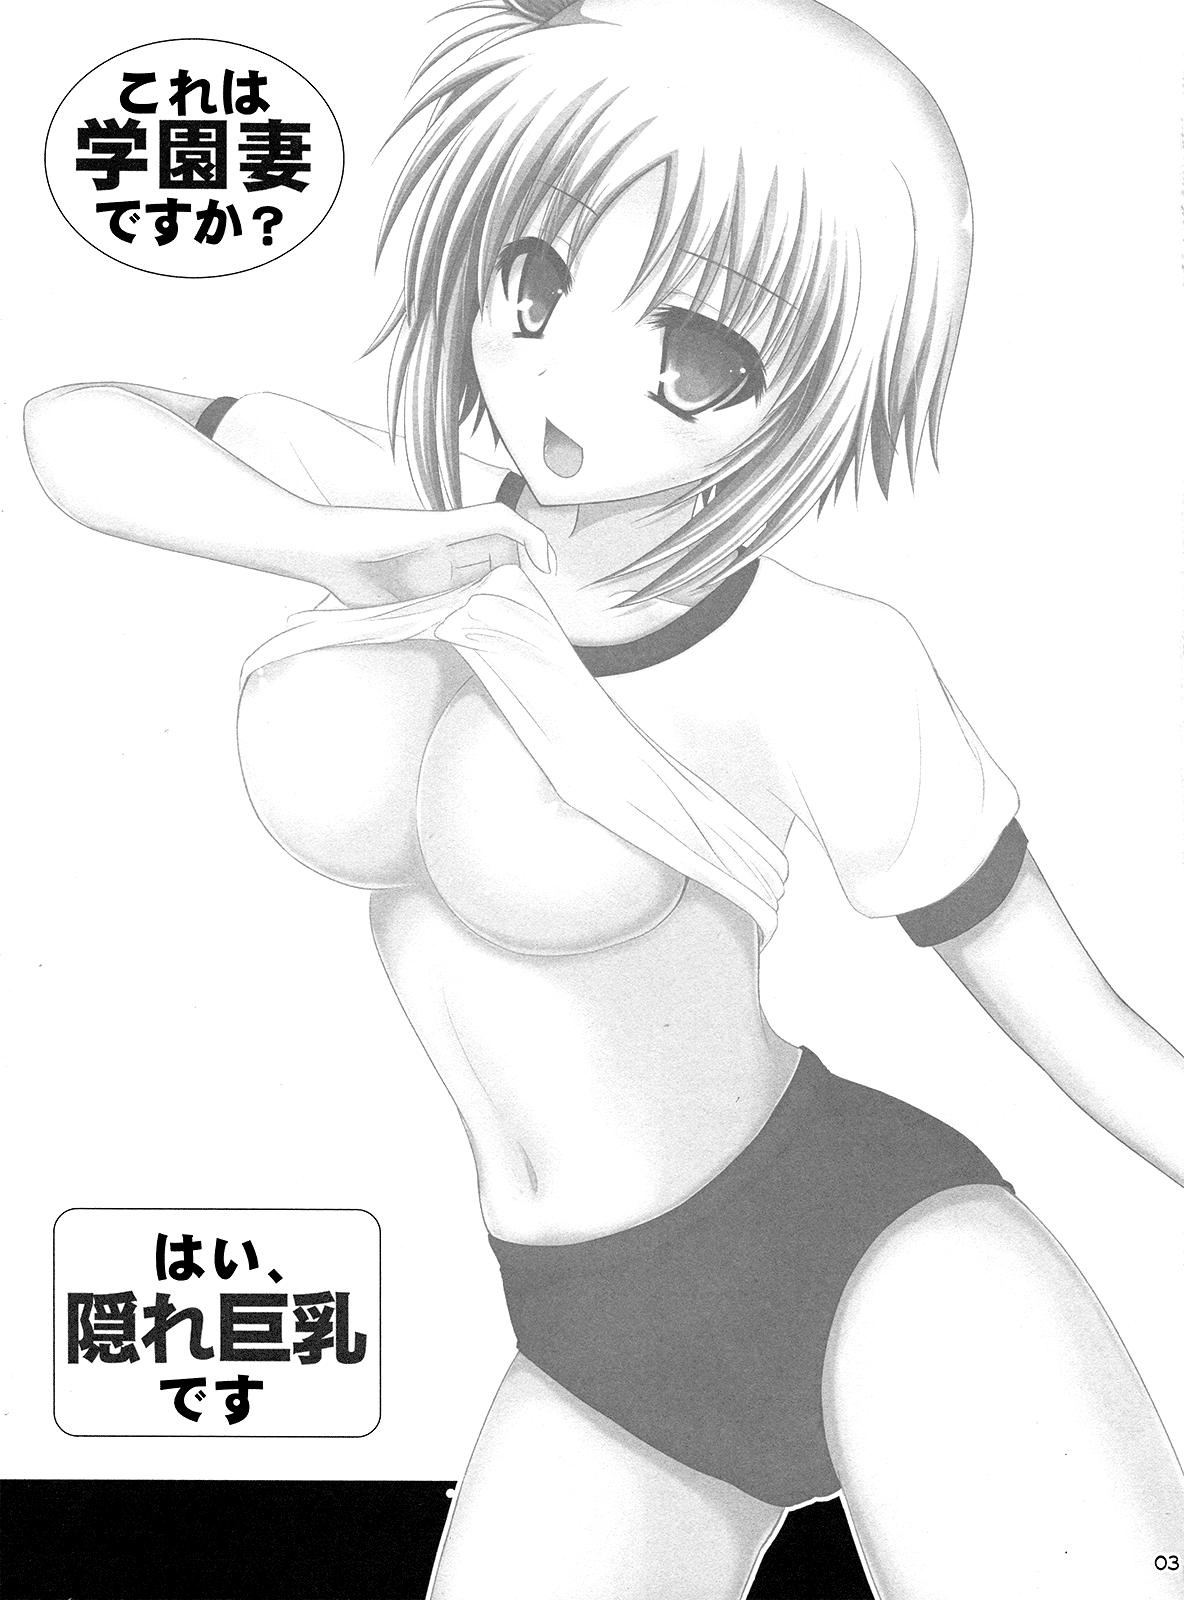 Humiliation Pov Is This A School Wife? Yes, She Secretly Has Big Breasts - Kore wa zombie desu ka Girls Getting Fucked - Page 2